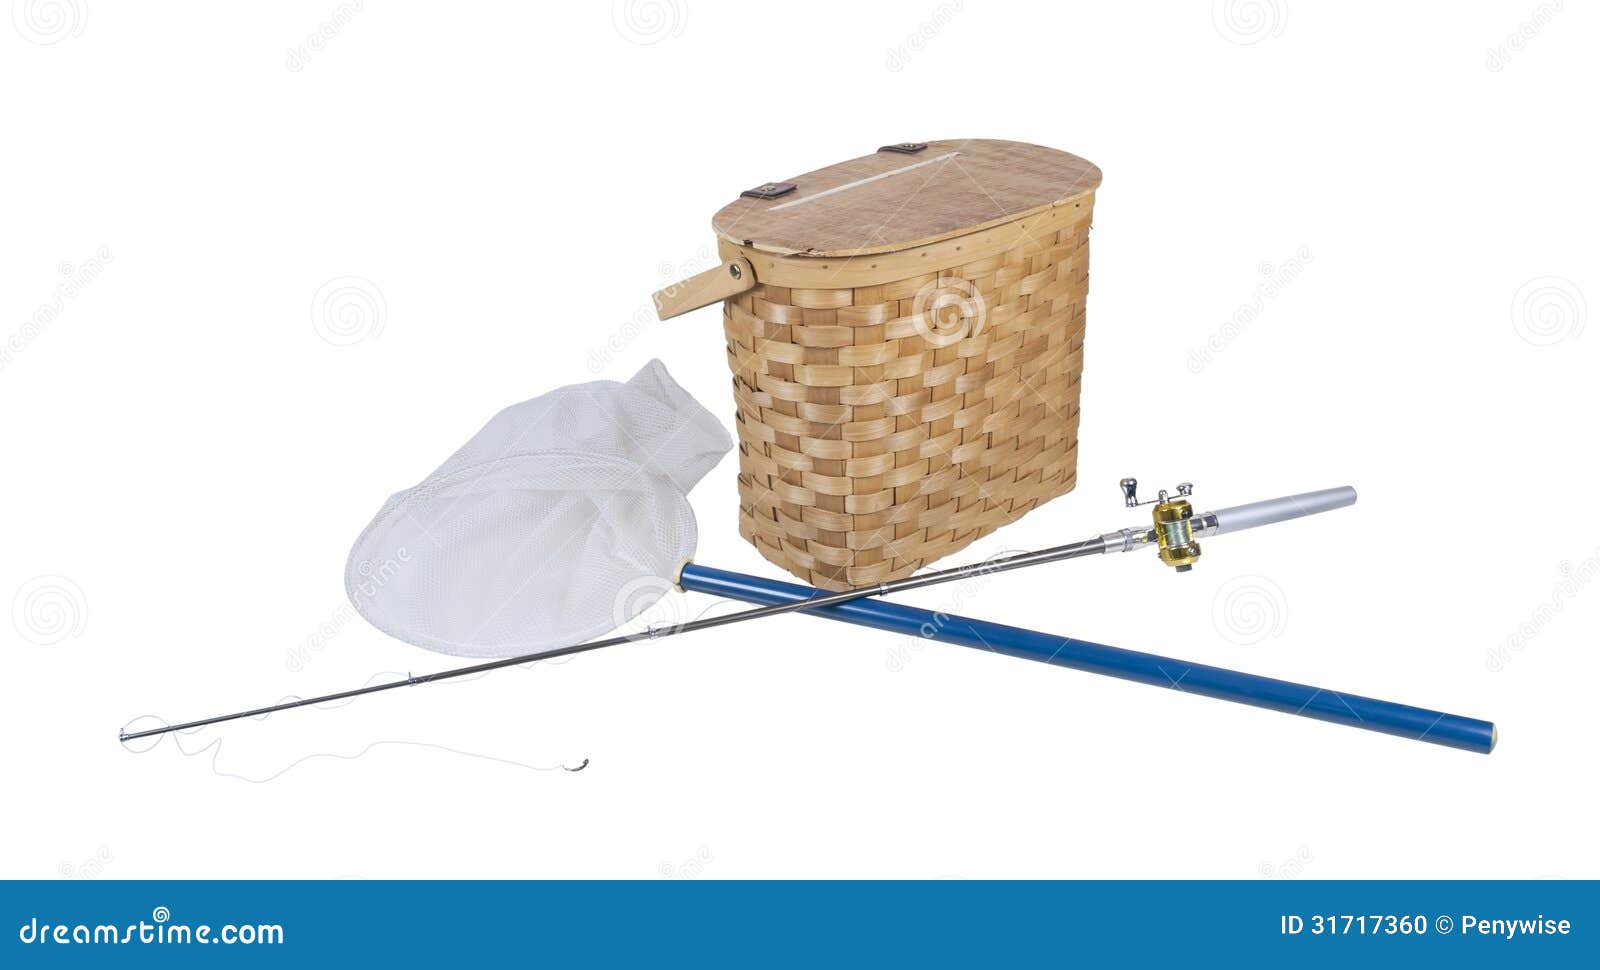 Fishing Pole with Net and Fish Basket Stock Photo - Image of weave